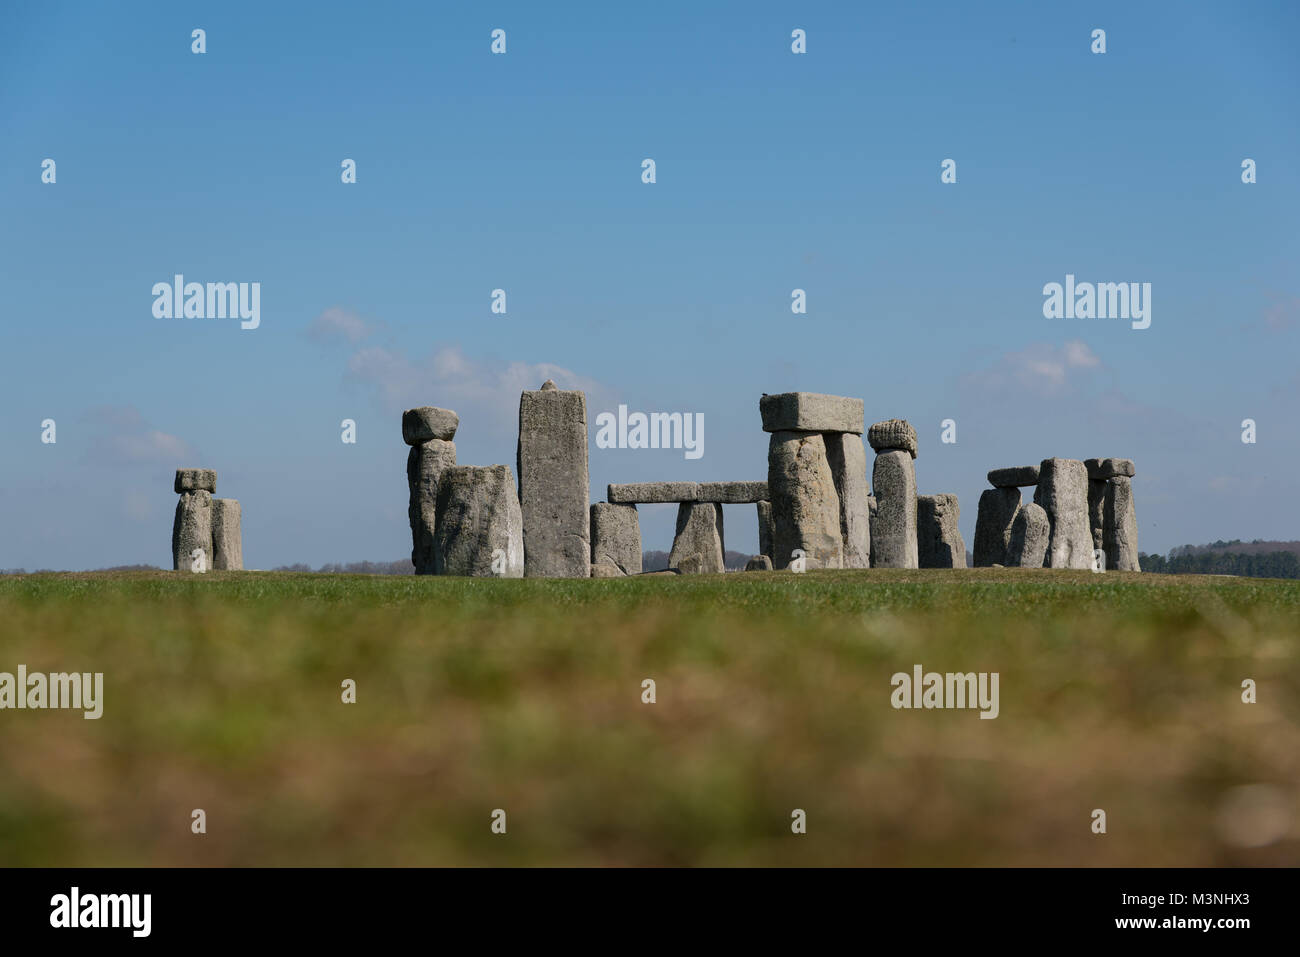 Stonehenge, Wiltshire - view across grass fields of the stone circles on a quiet day with no visitors - blurred foreground Stock Photo